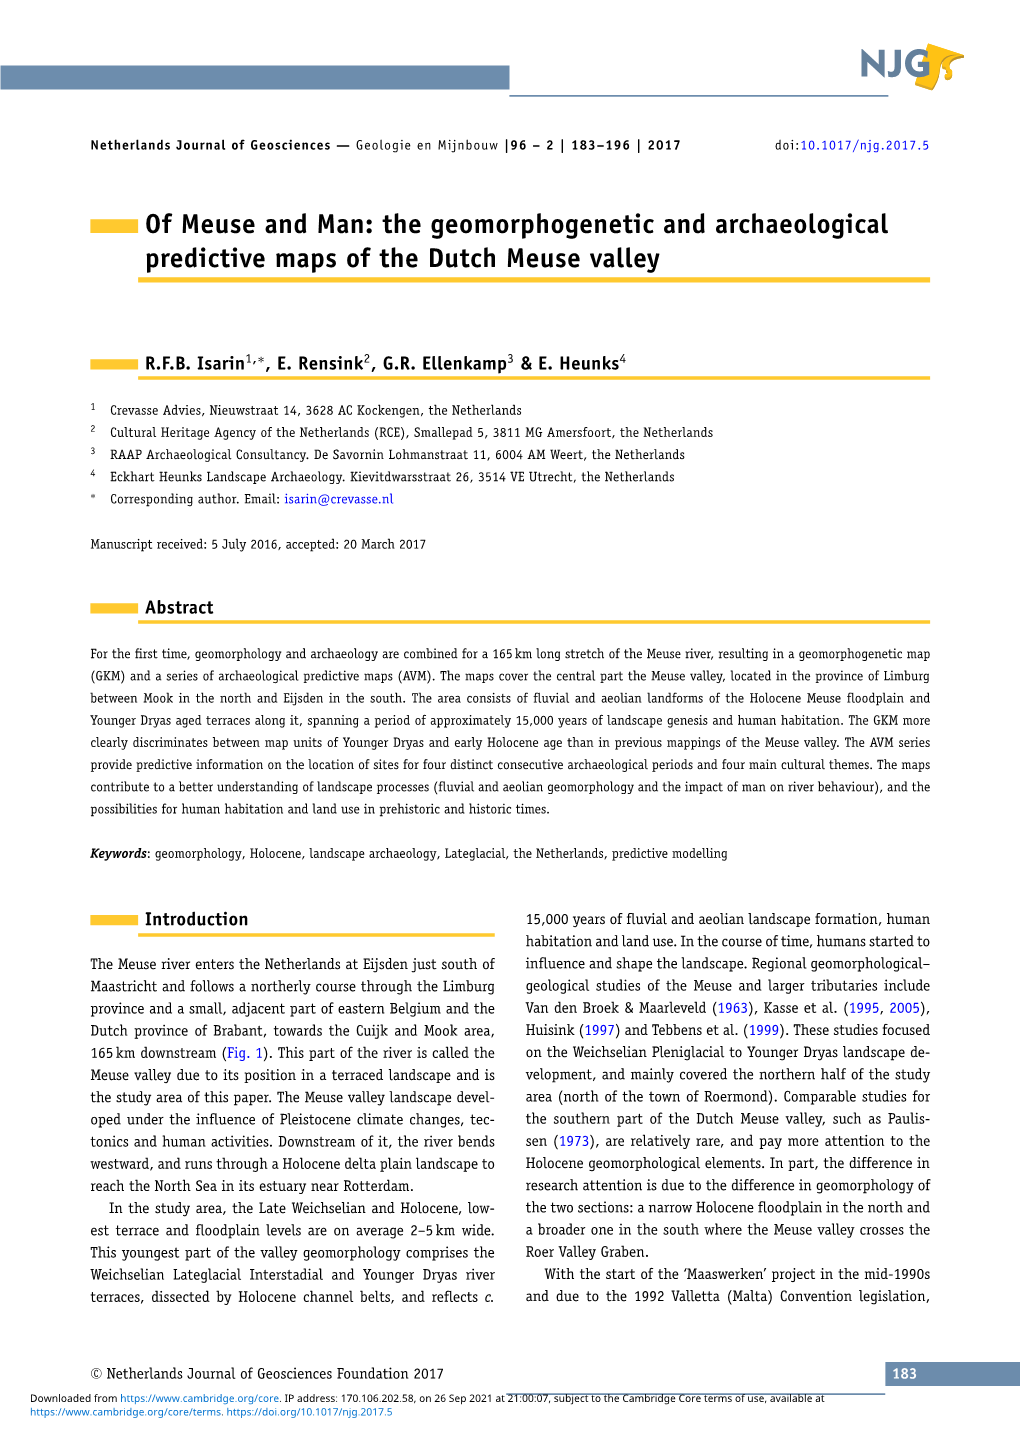 The Geomorphogenetic and Archaeological Predictive Maps of the Dutch Meuse Valley